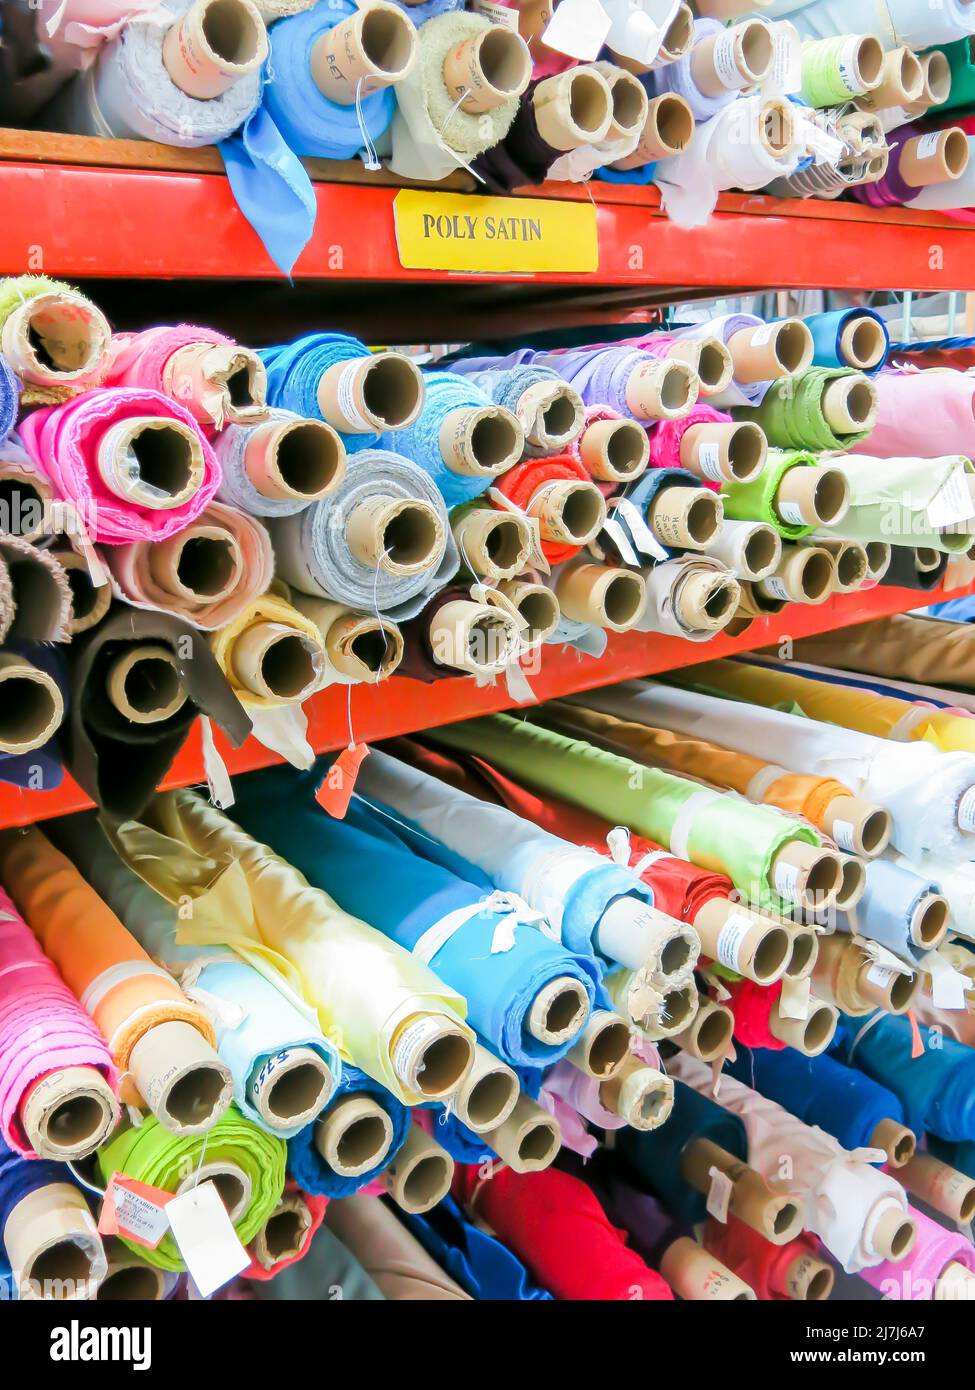 Rolls of Fabric on Store Shelves Ready for Purchase Stock Photo